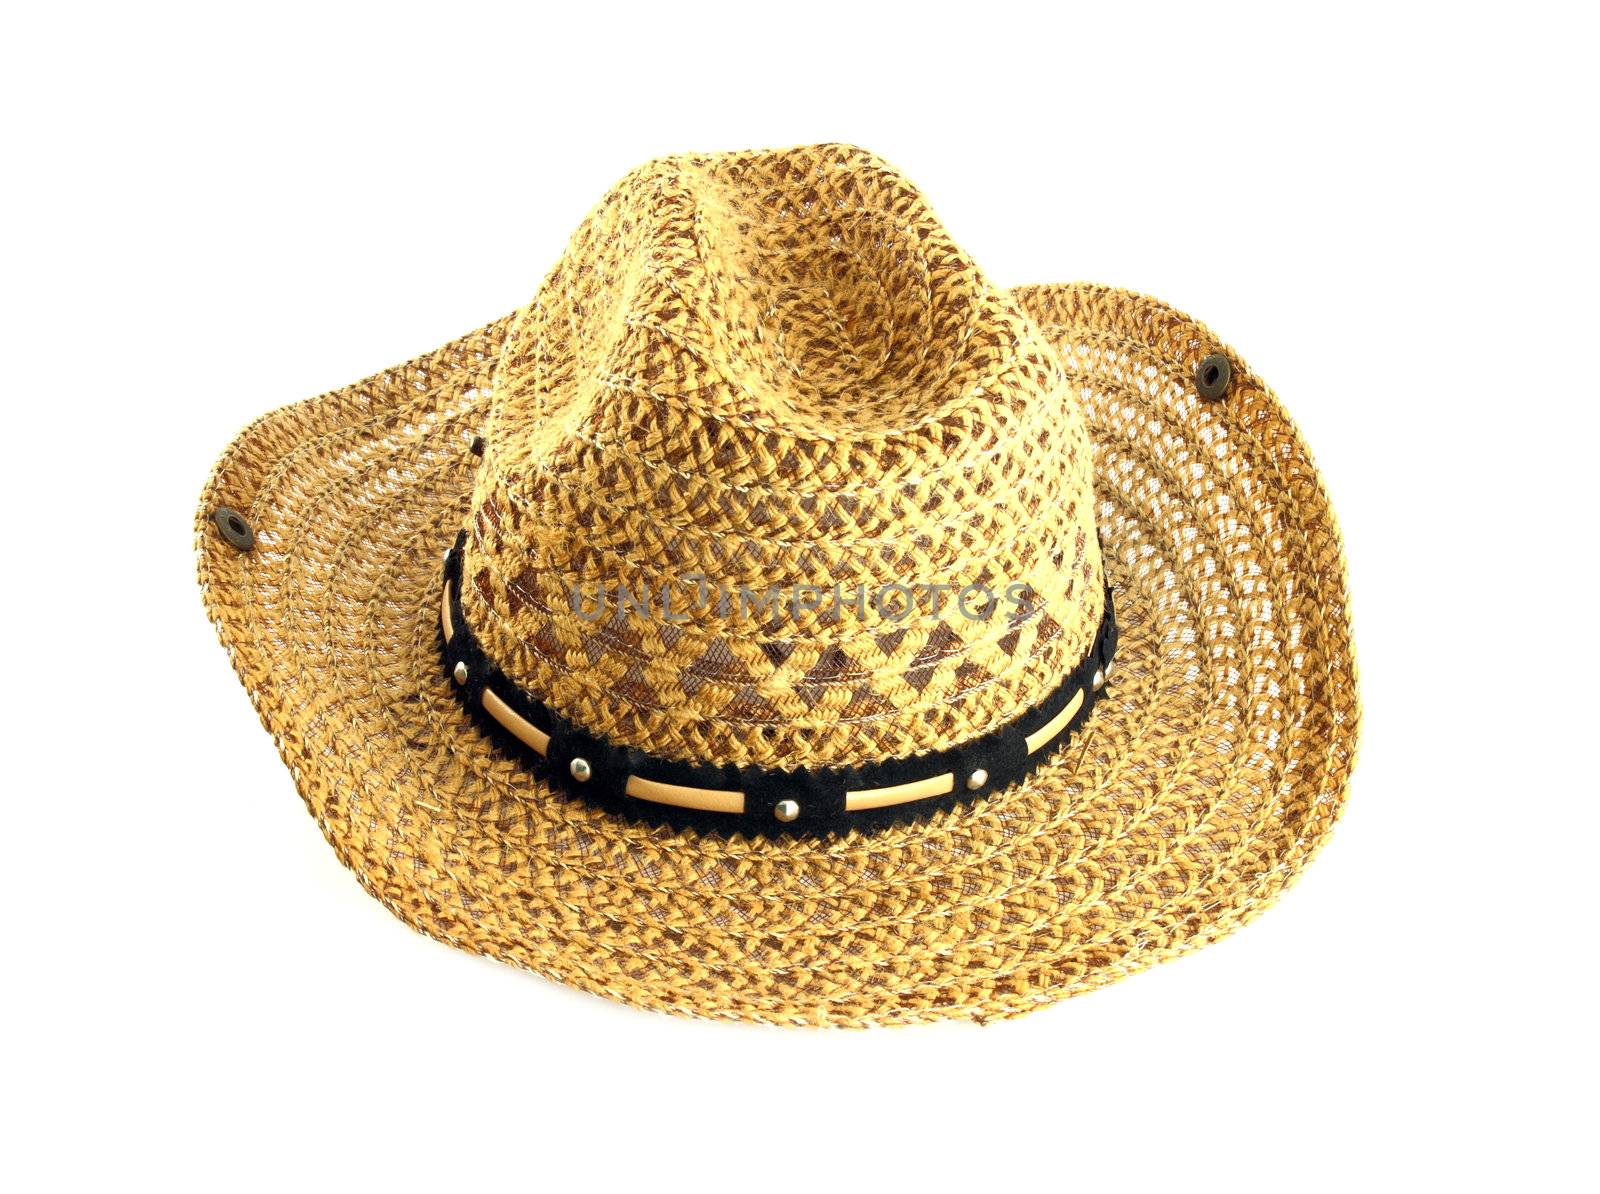 straw hat isolated